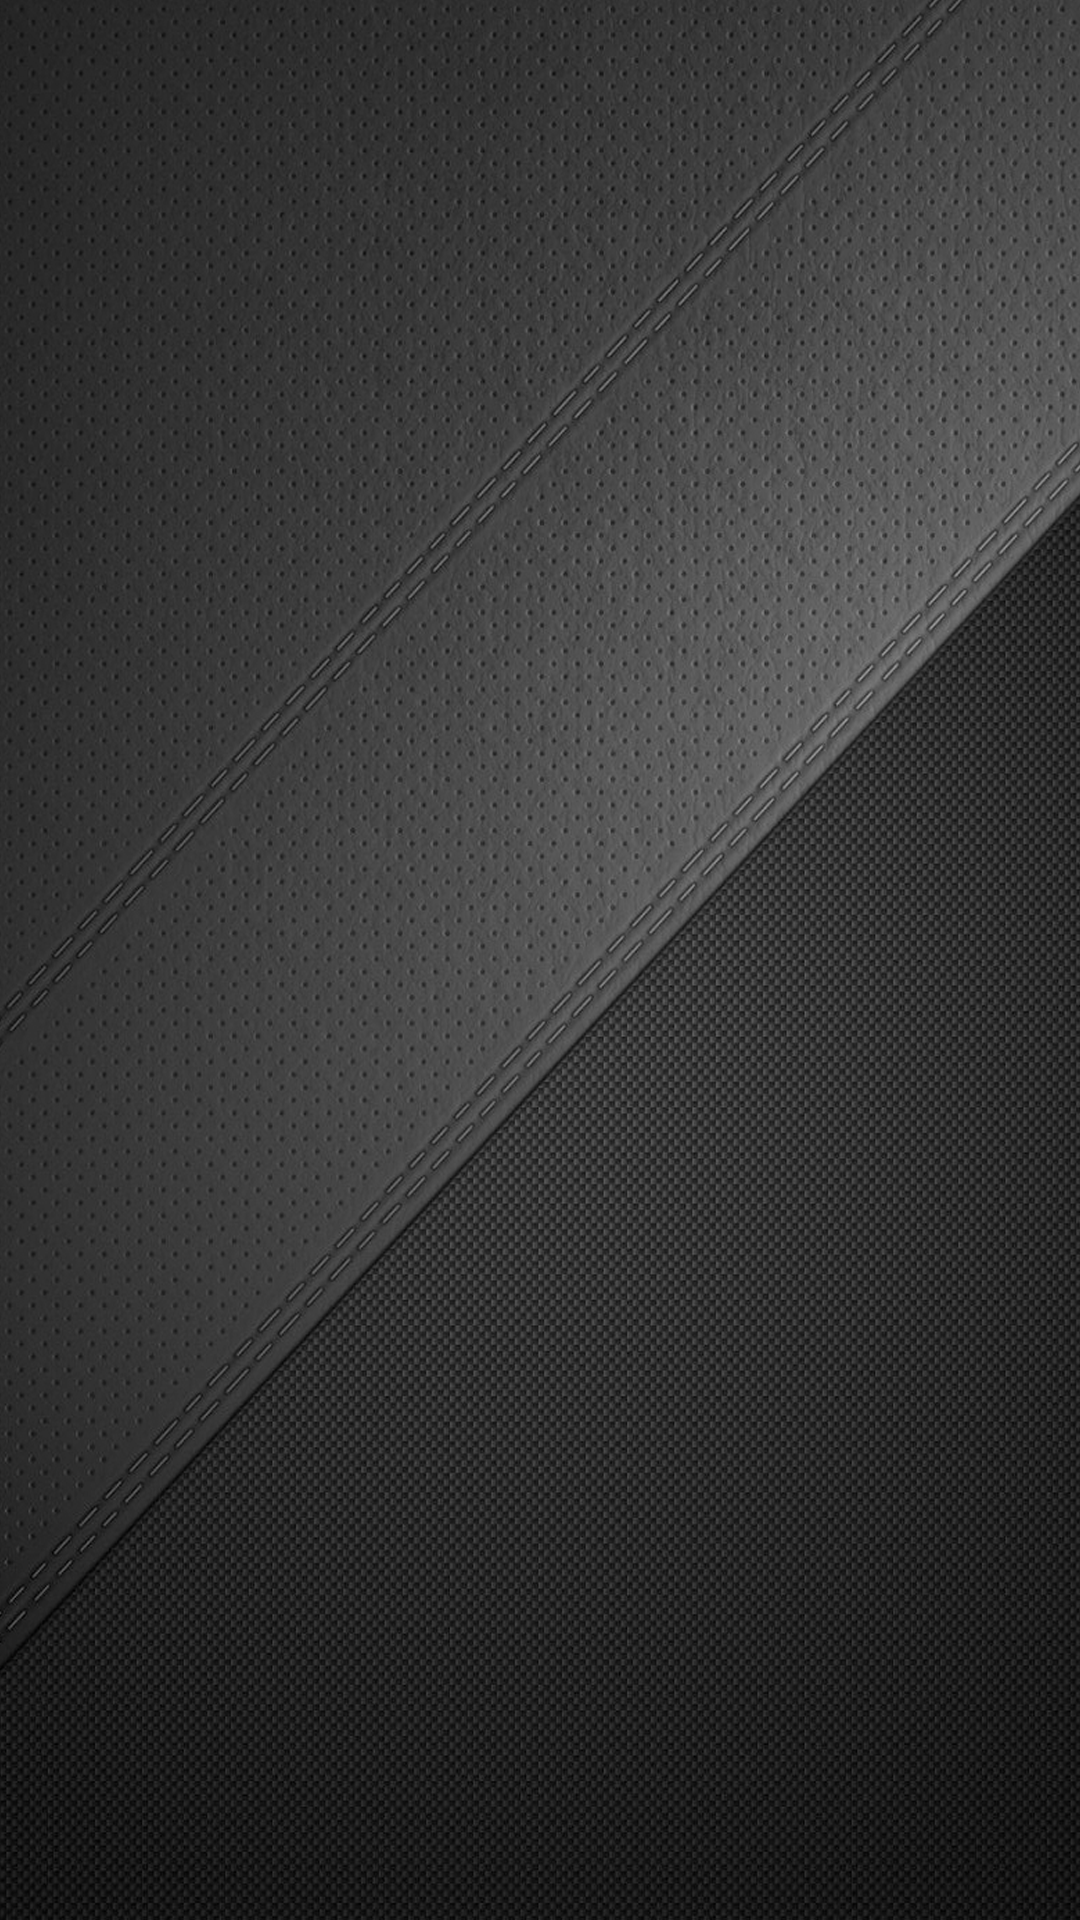 Textures #Perforated Leather Texture Dark Android Wallpaper